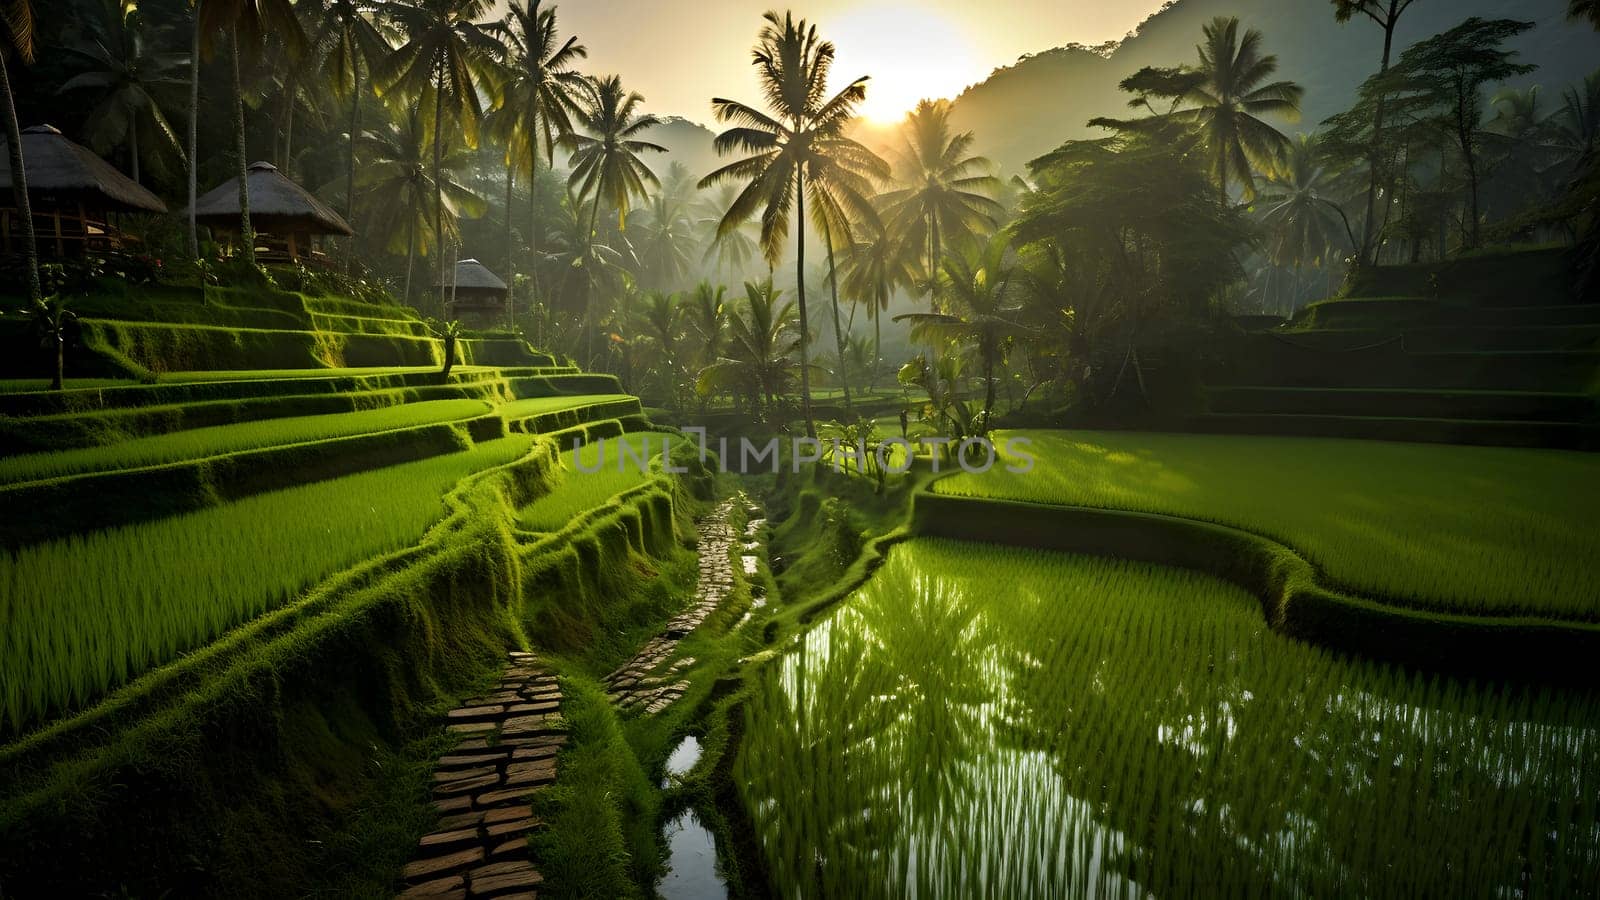 ricefields with intense light green color in the sunrise, neural network generated photorealistic image by z1b